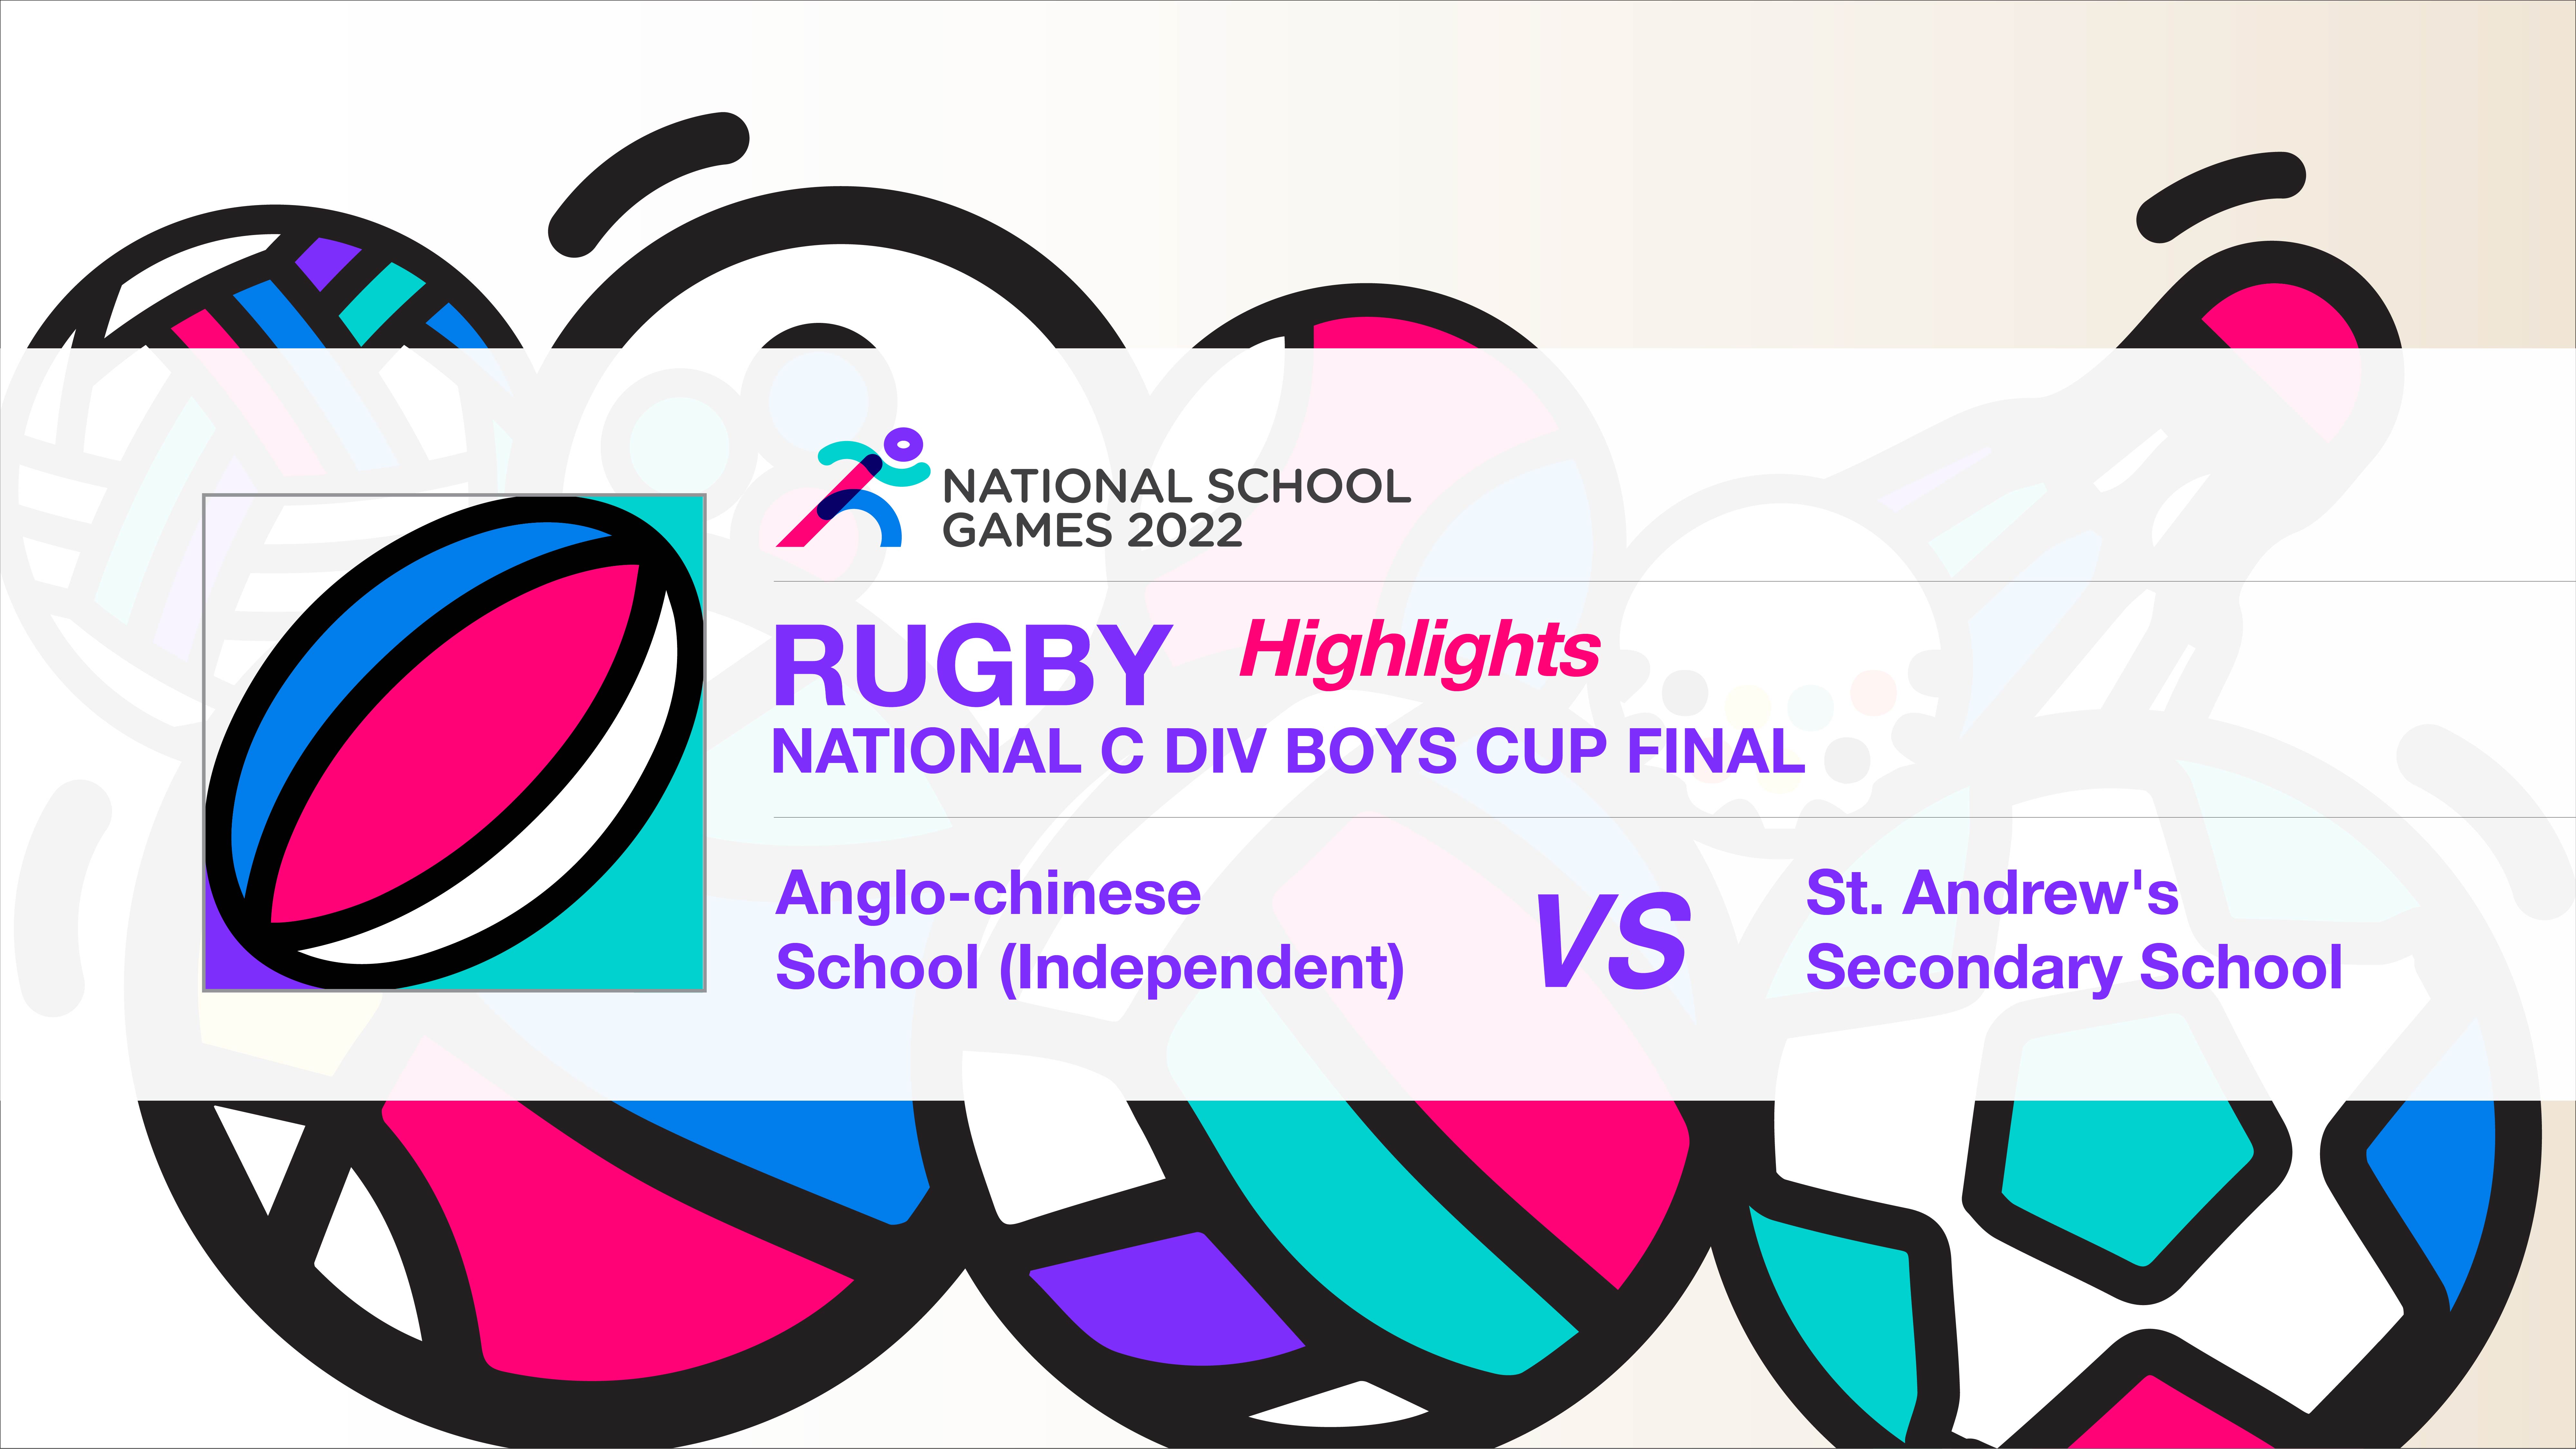 SSSC Rugby National C Division Boys Cup Final | Anglo-Chinese School (Independent) vs St. Andrew's Secondary School - Highlights